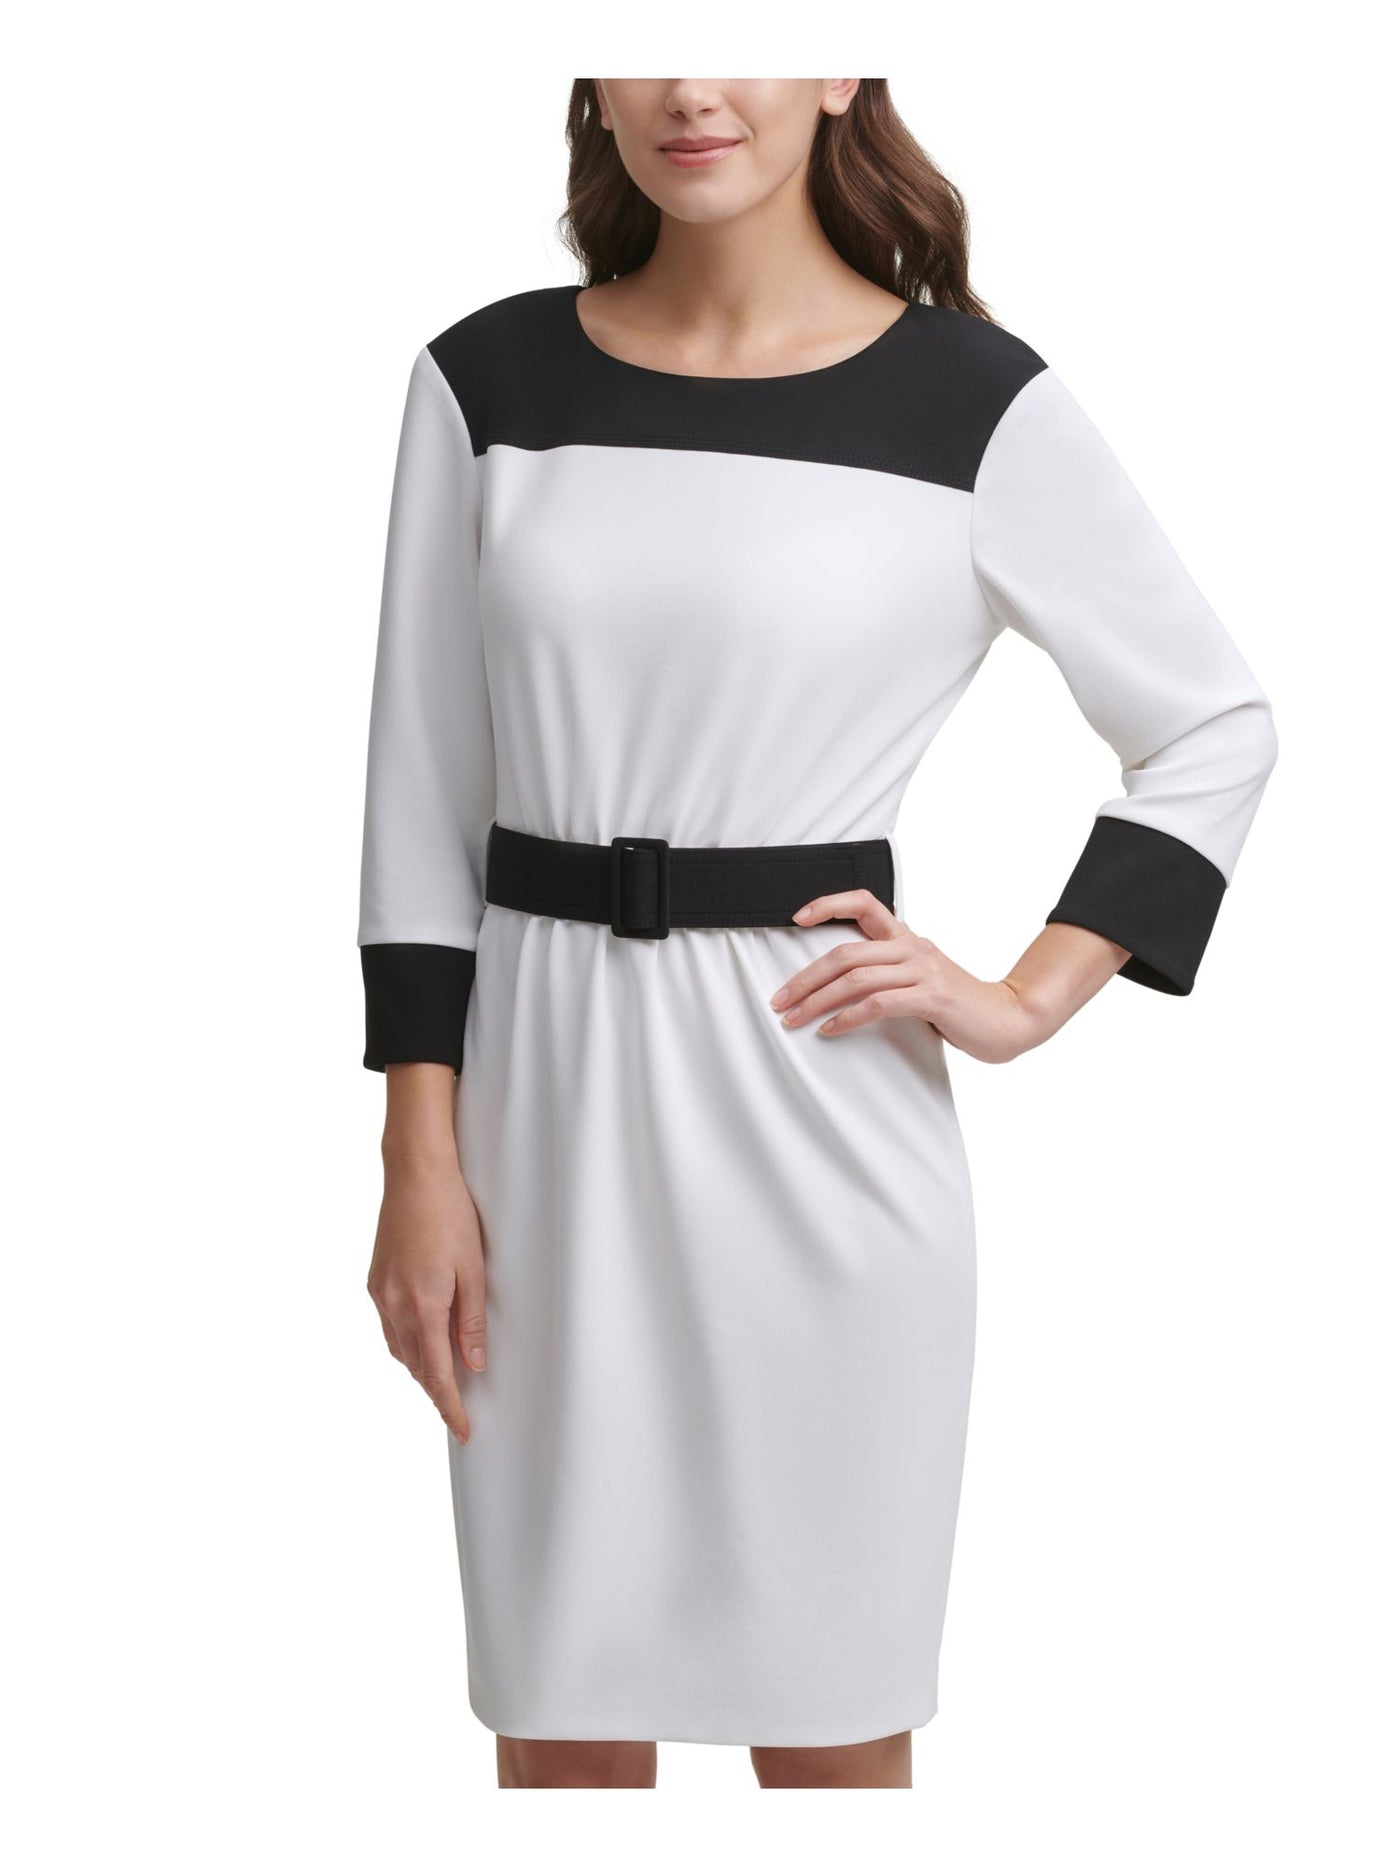 CALVIN KLEIN Womens White Zippered Color Block 3/4 Sleeve Round Neck Above The Knee Wear To Work Sheath Dress 14